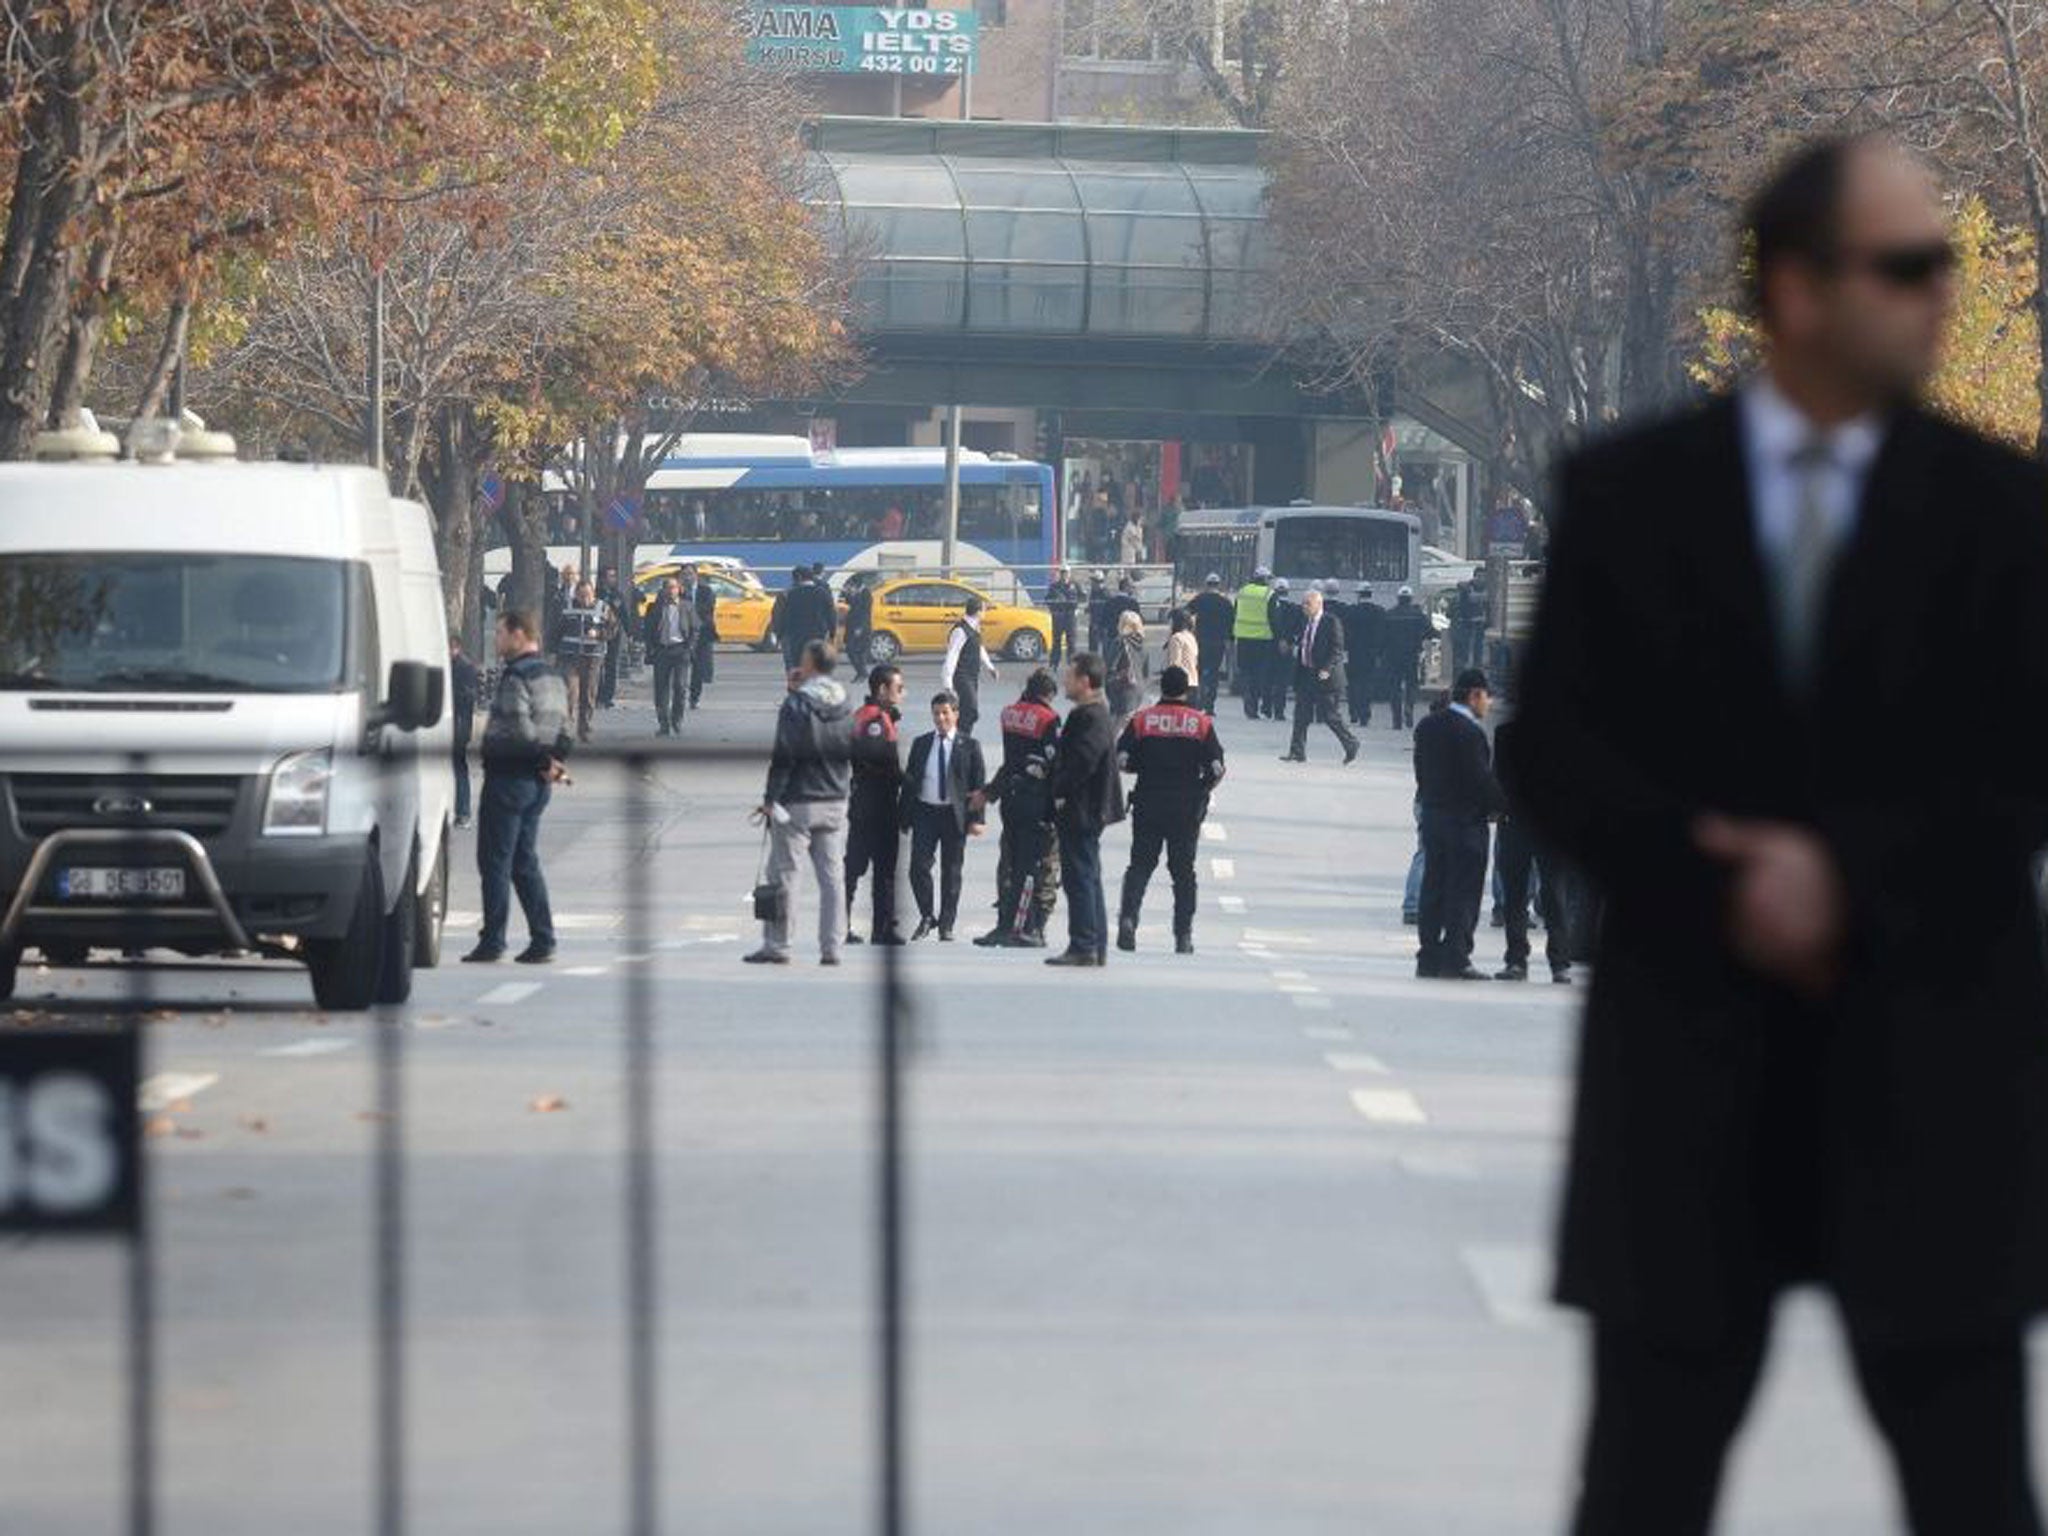 Turkish police secure the area after they shot and wounded a suspected suicide bomber close to the prime minister's office in Ankara, Turkey 21 November 2013